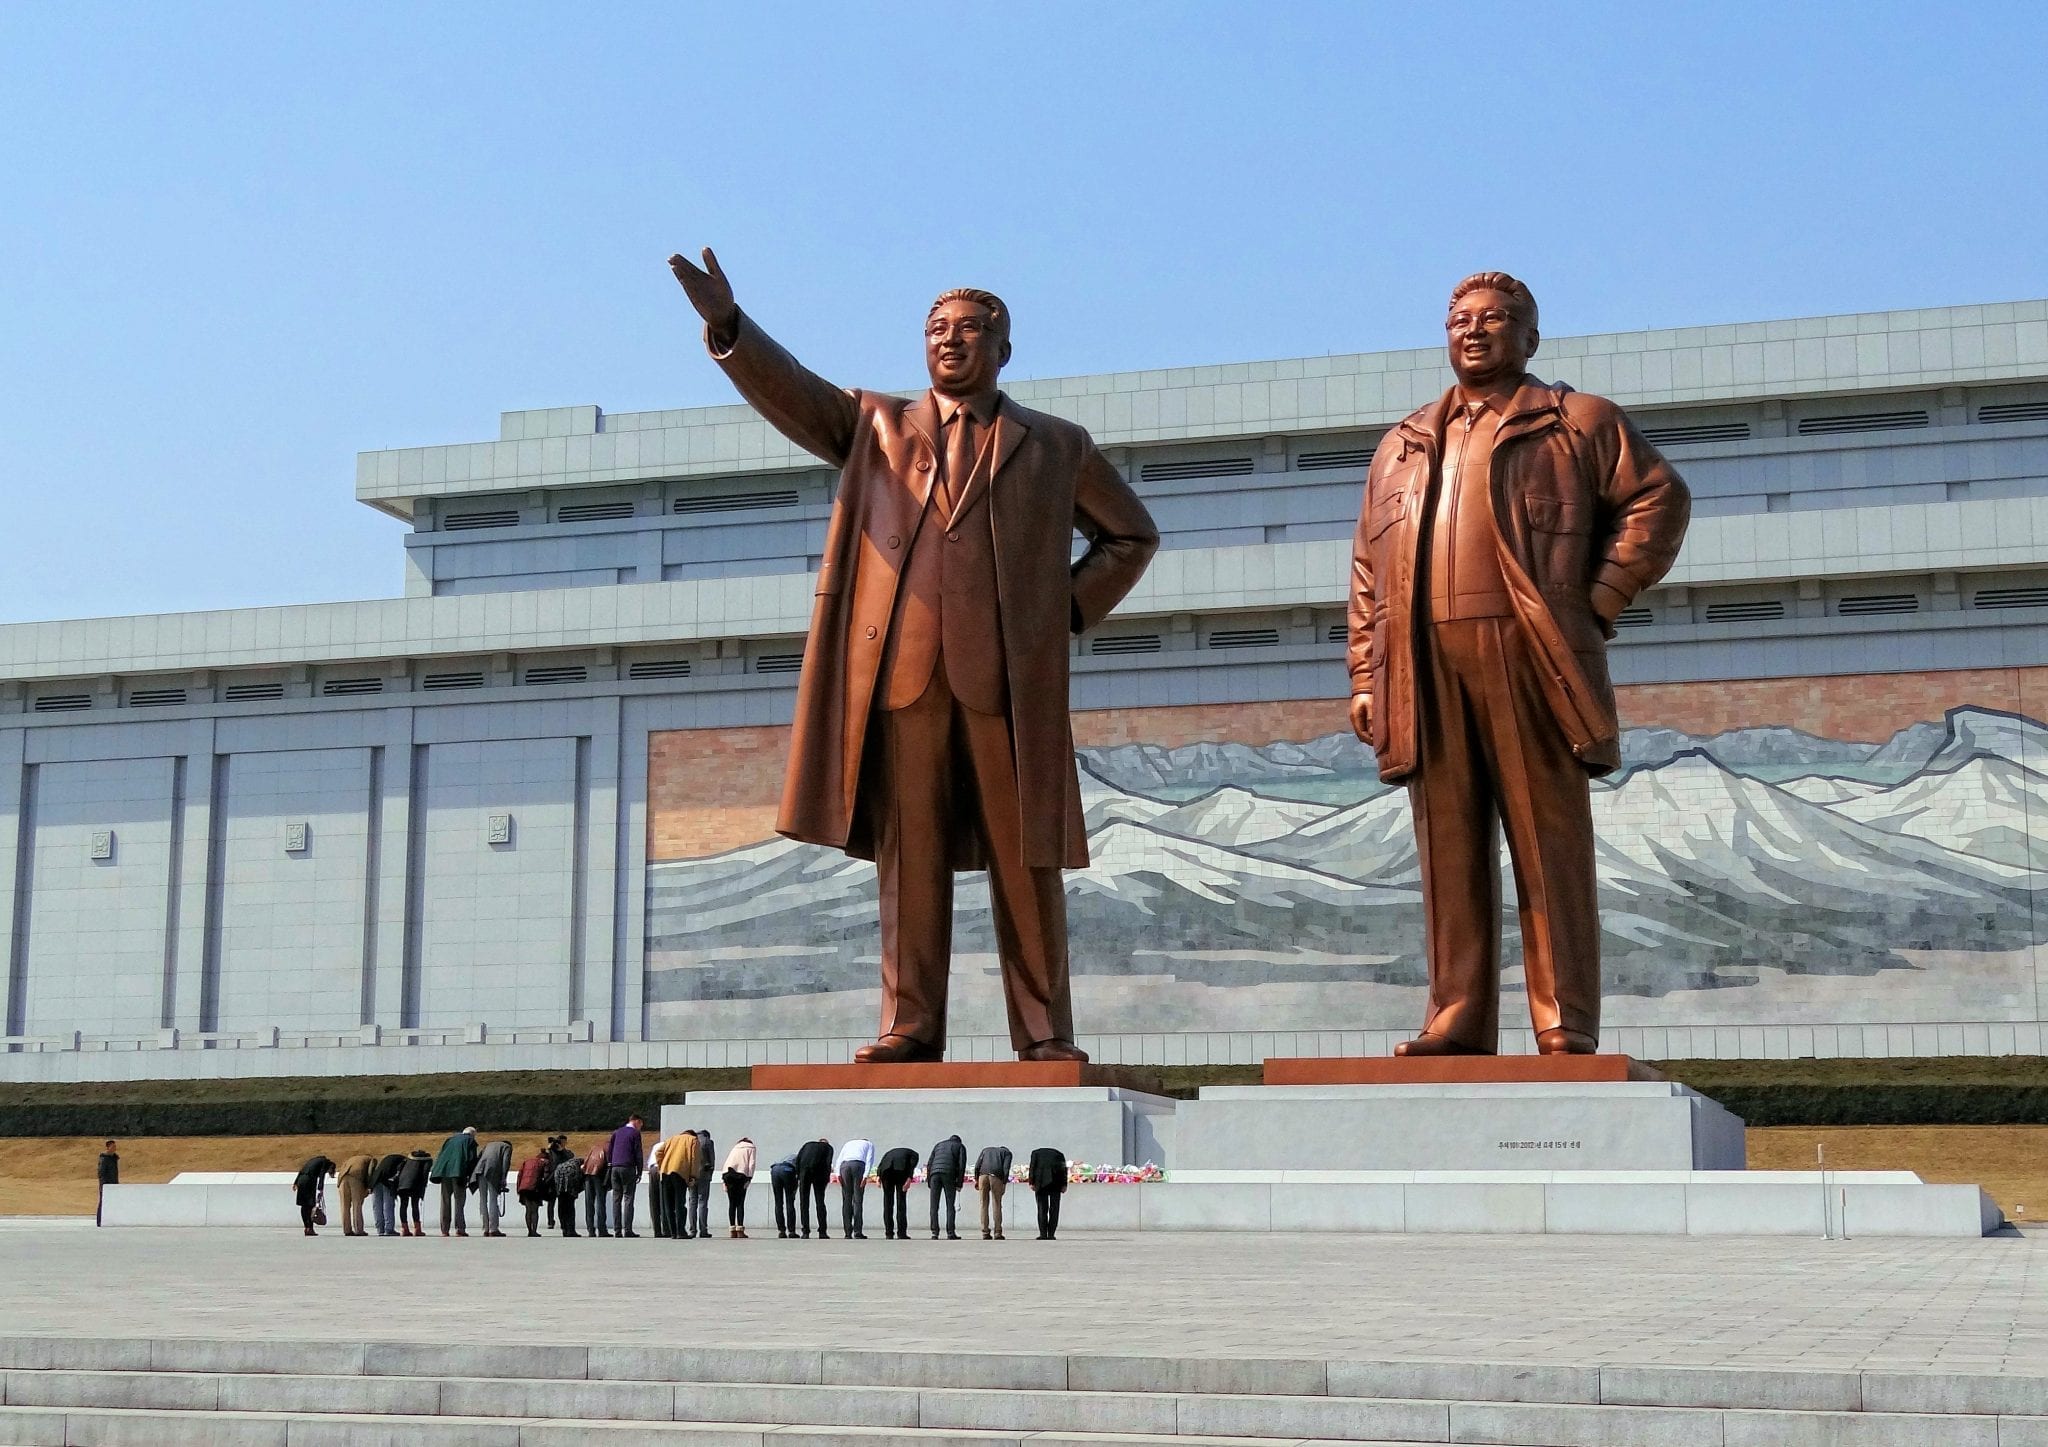 Visitors bowing in a show of respect for North Korean leaders Kim Il-sung and Kim Jong-il on Mansudae (Mansu Hill) in Pyongyang, North Korea; image by Bjørn Christian Tørrissen (Own work), CC BY-SA 3.0, via Wikimedia Commons, no changes.